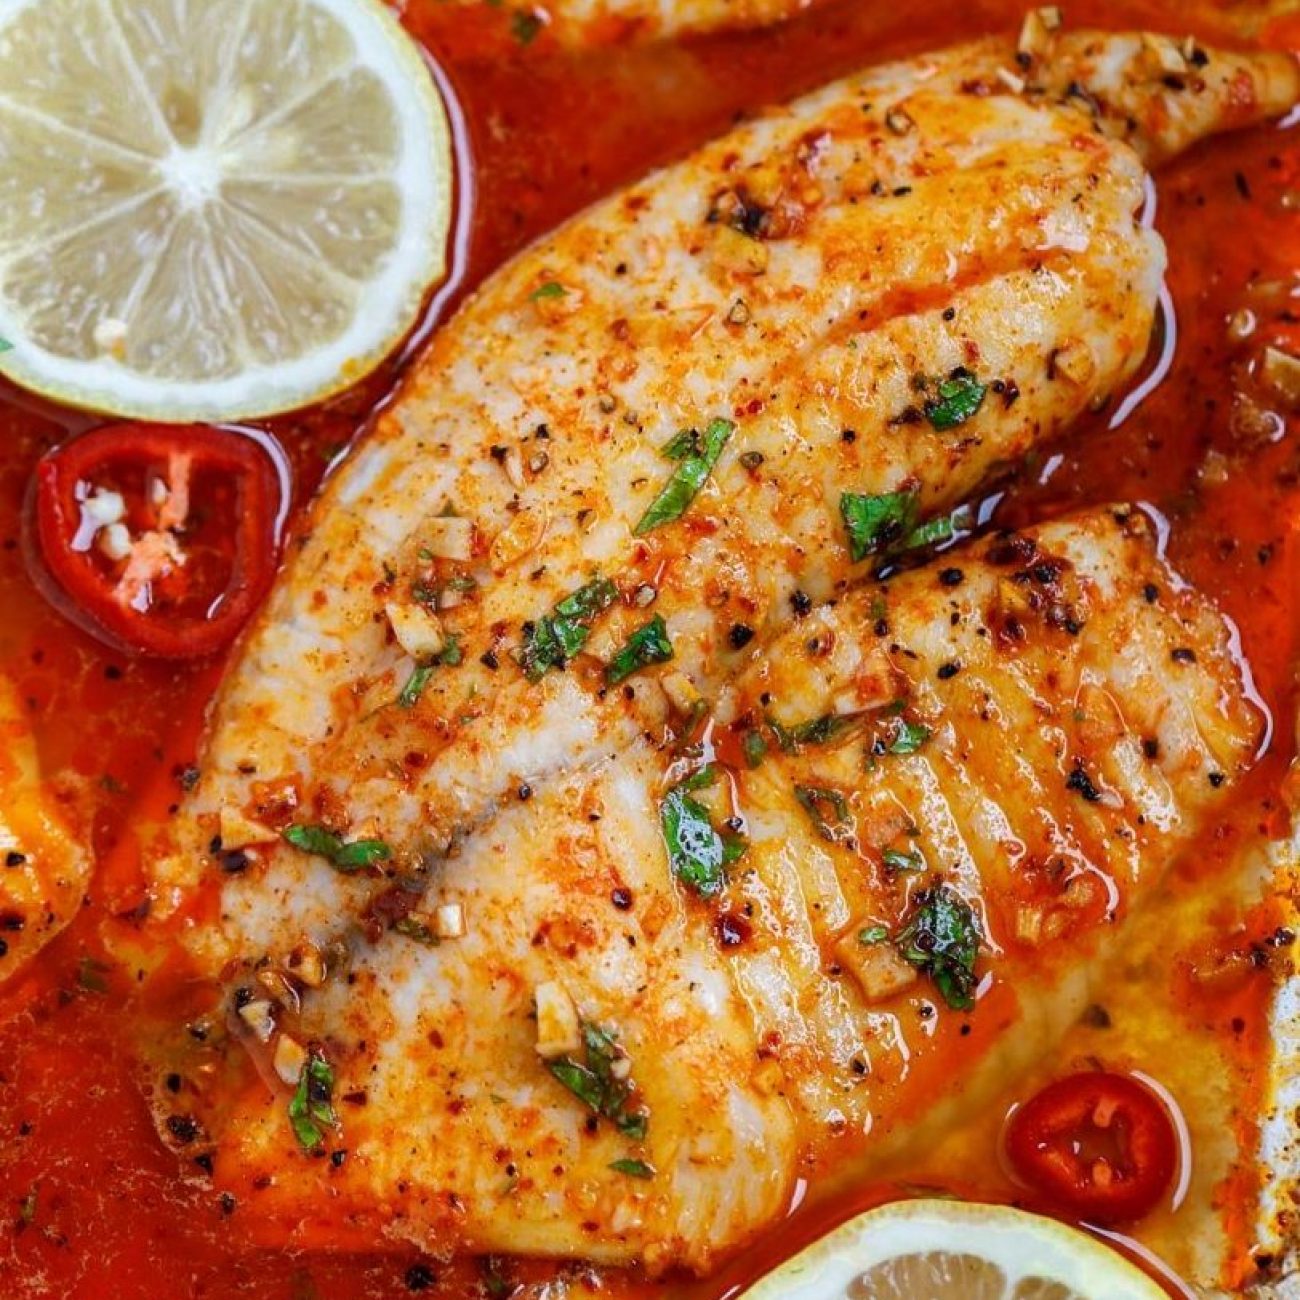 Baked Tilapia With Lots Of Spice